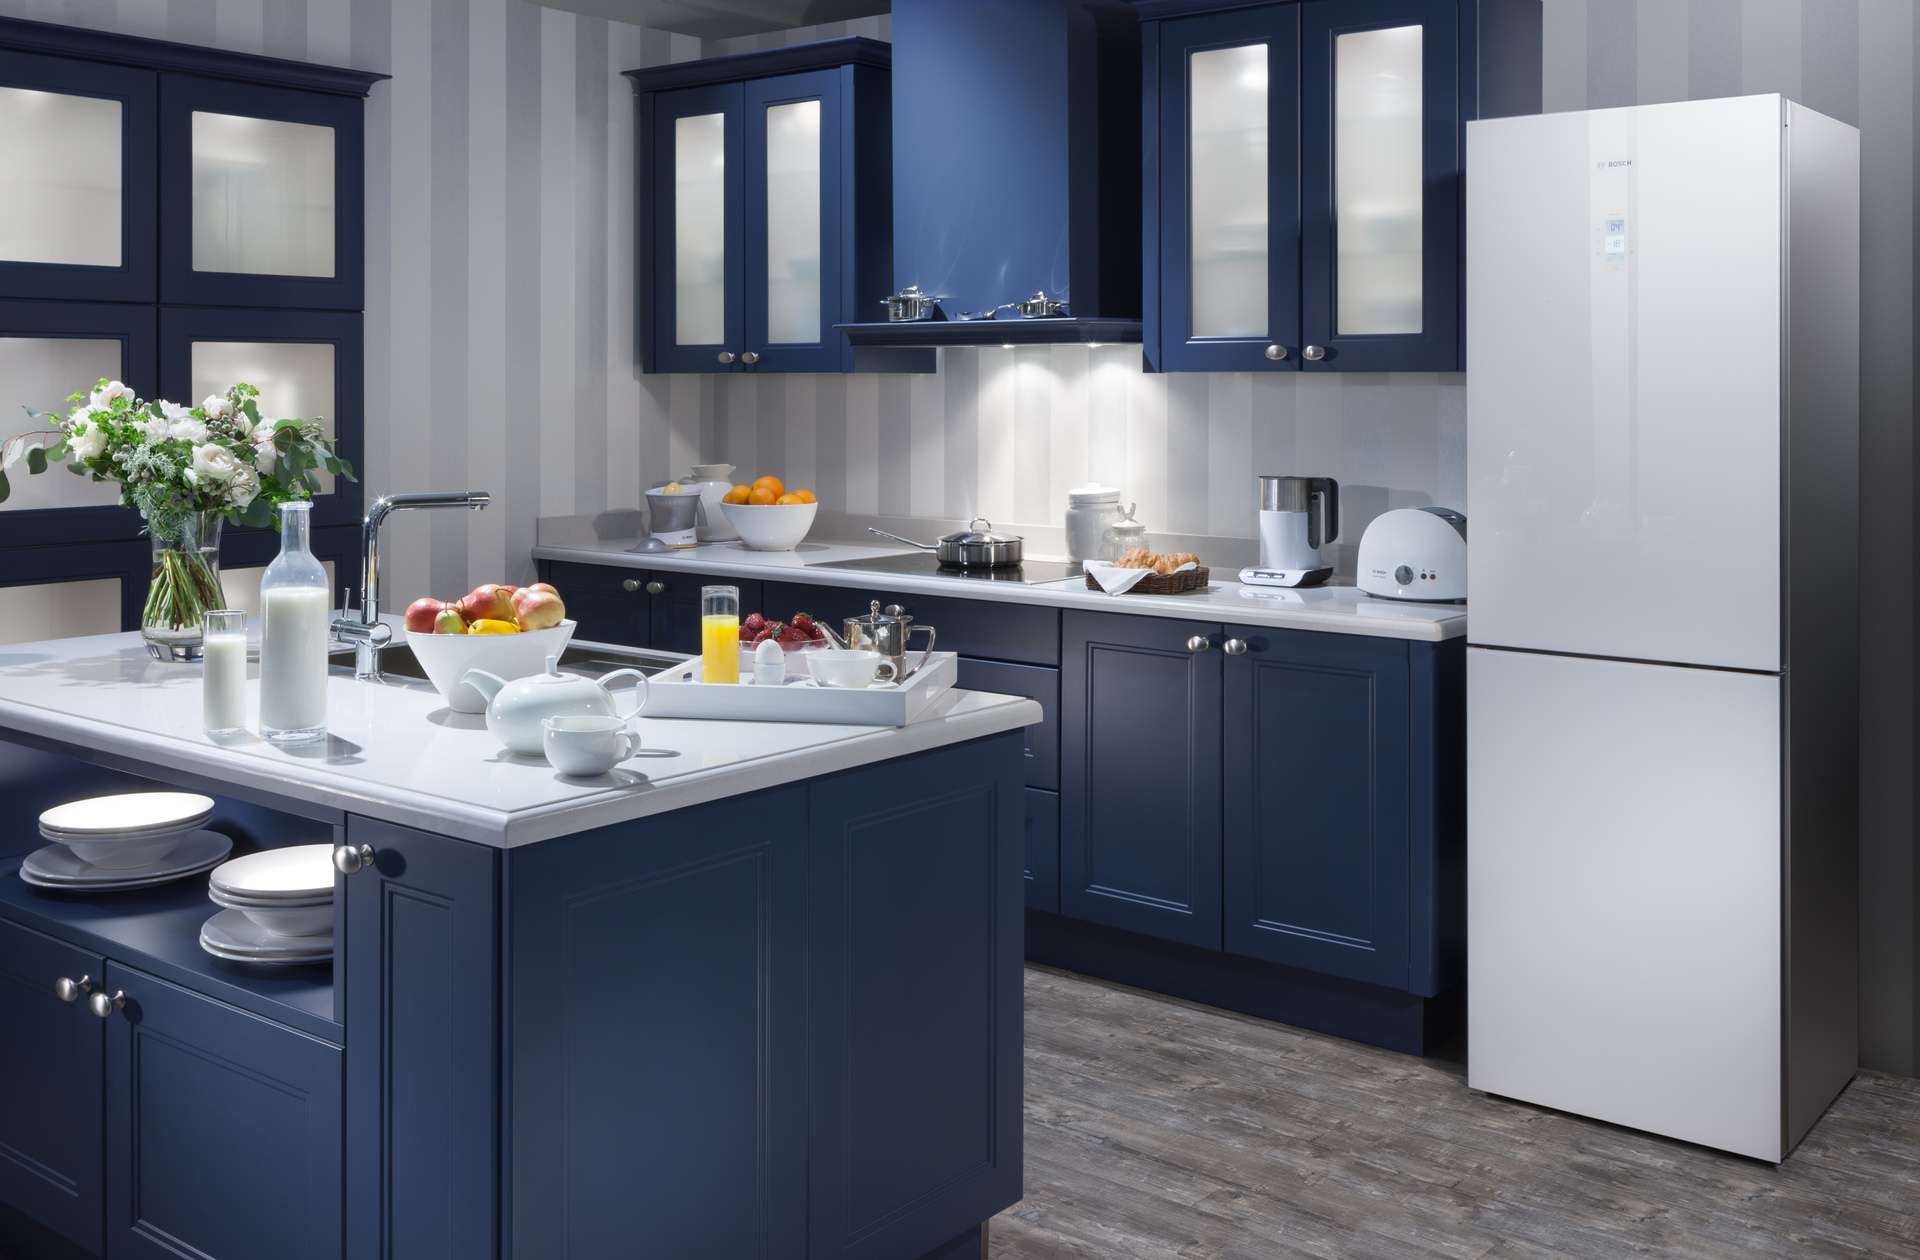 large refrigerator in the design of the kitchen in light color